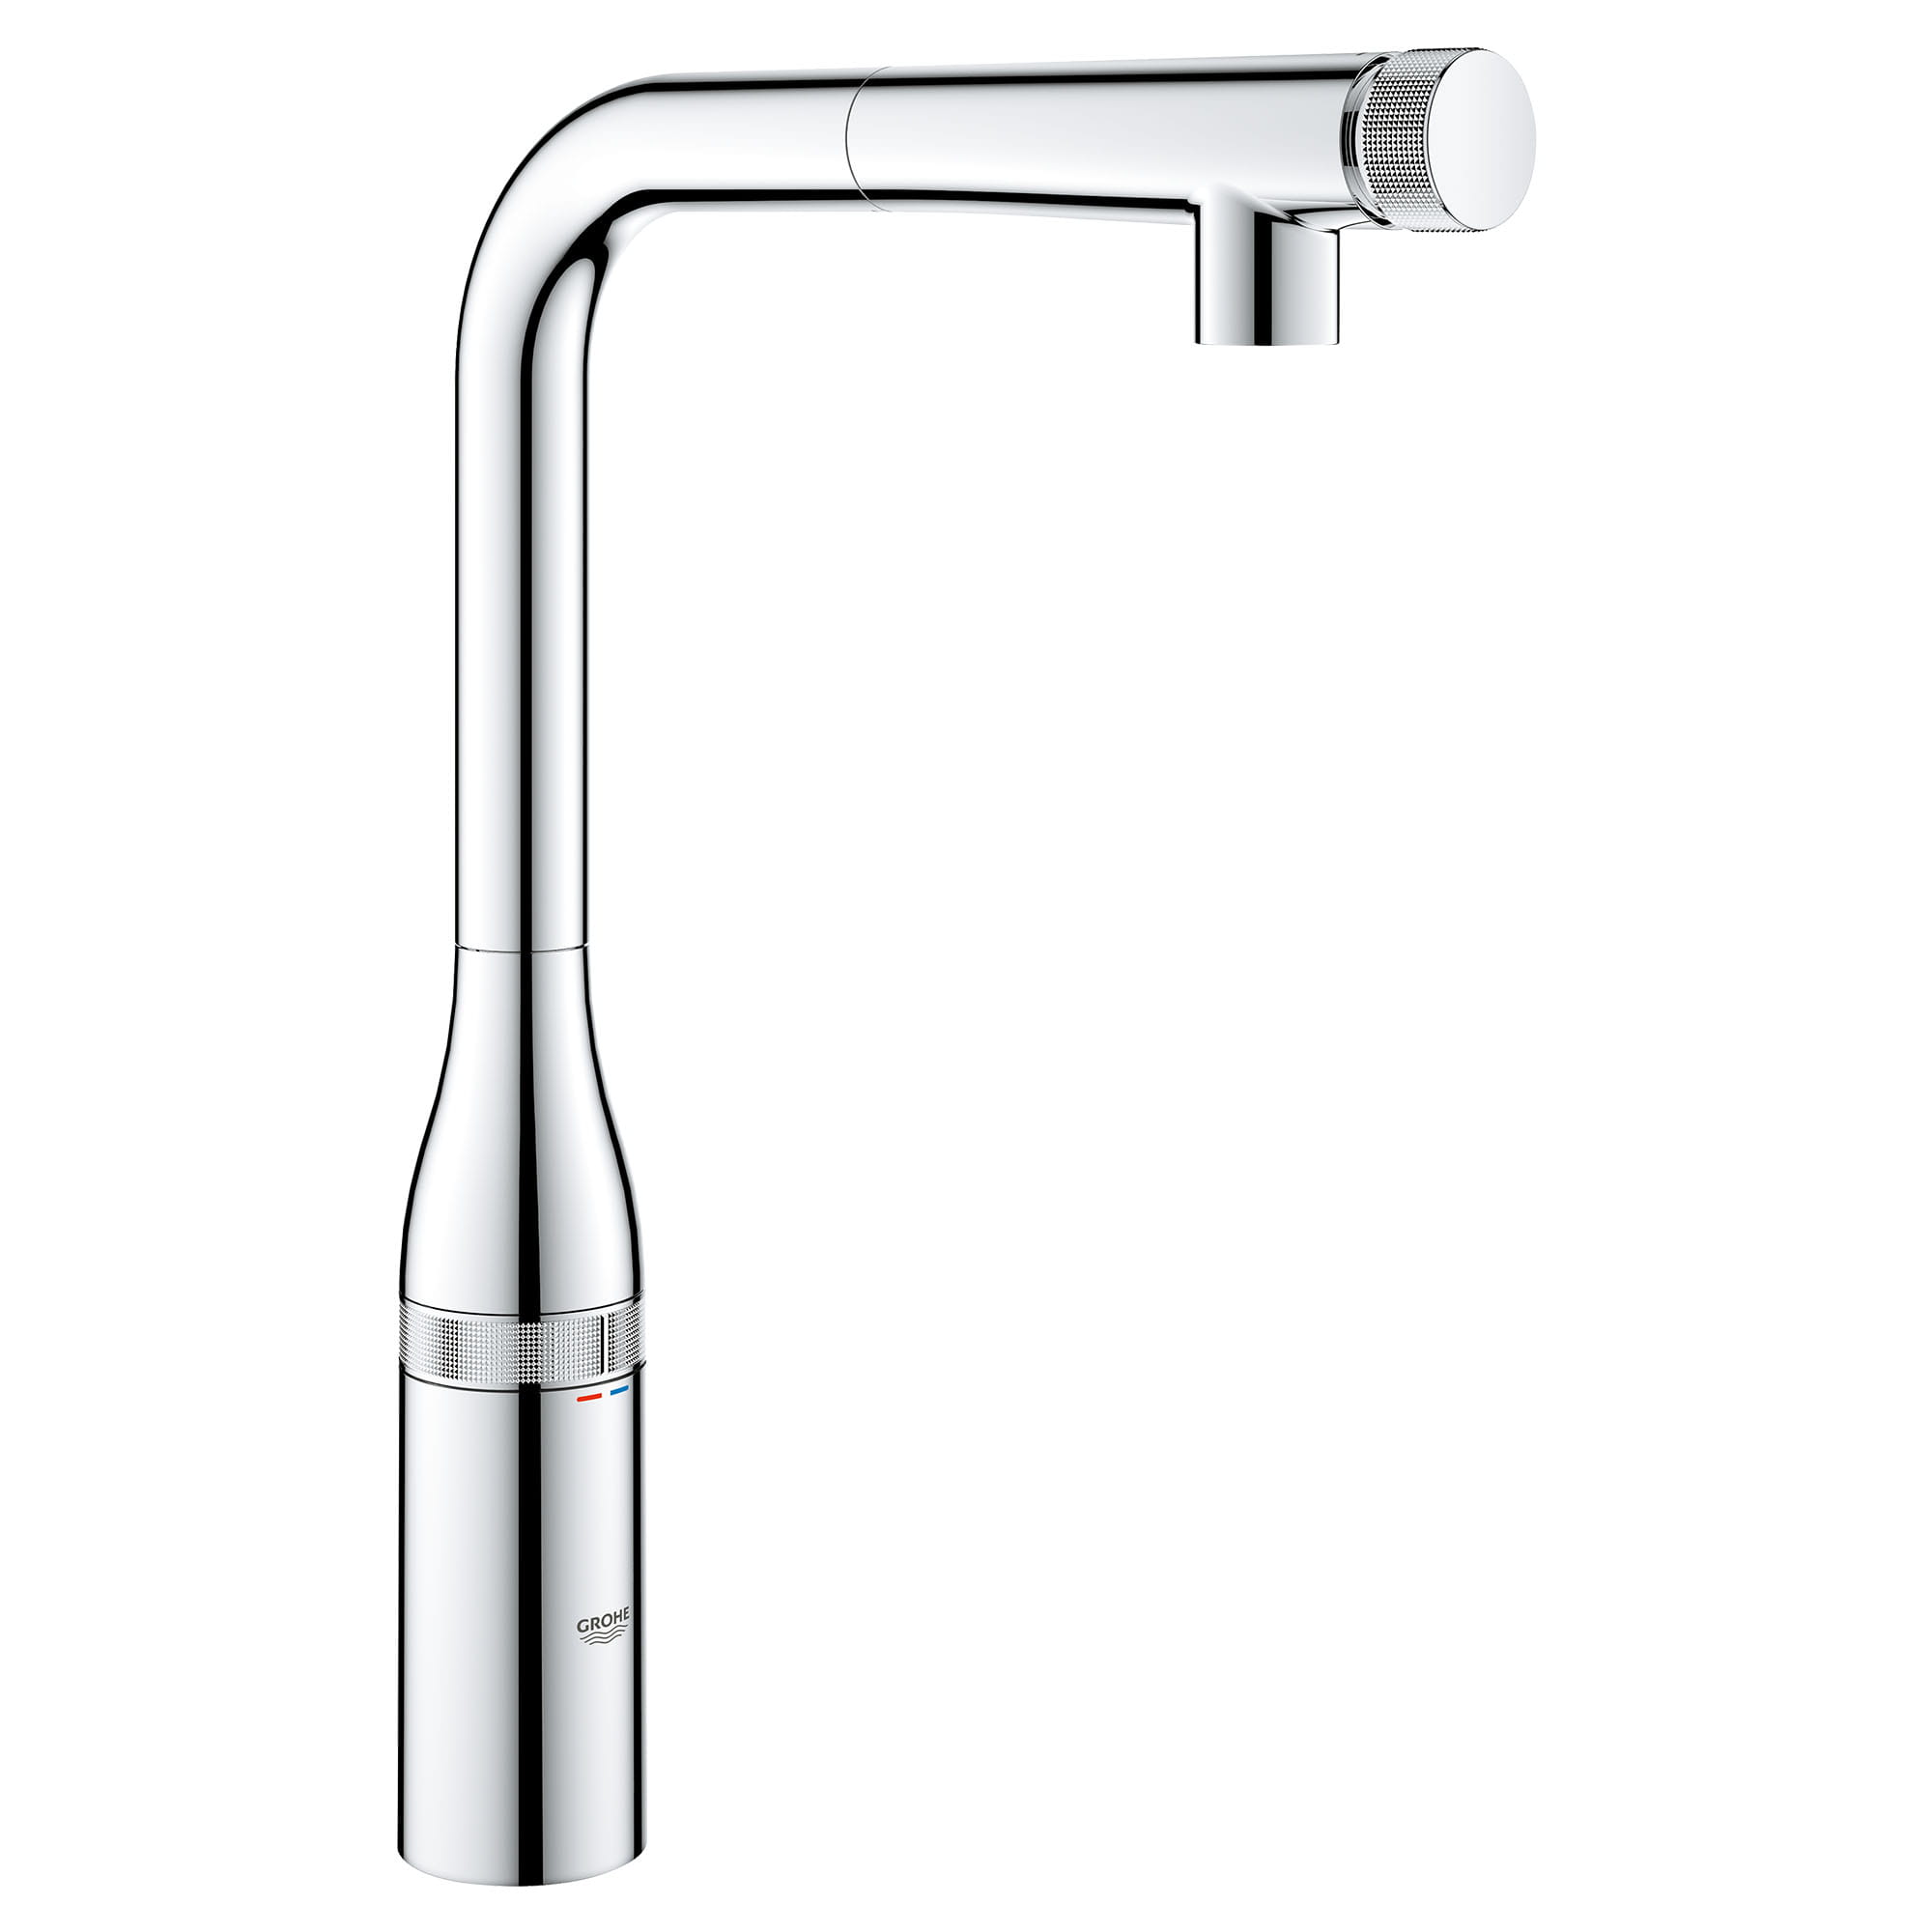 ESSENCE NEW  SMARTCONTROL PULL-OUT SINGLE SPRAY KITCHEN FAUCET 1.75 GPM-pro